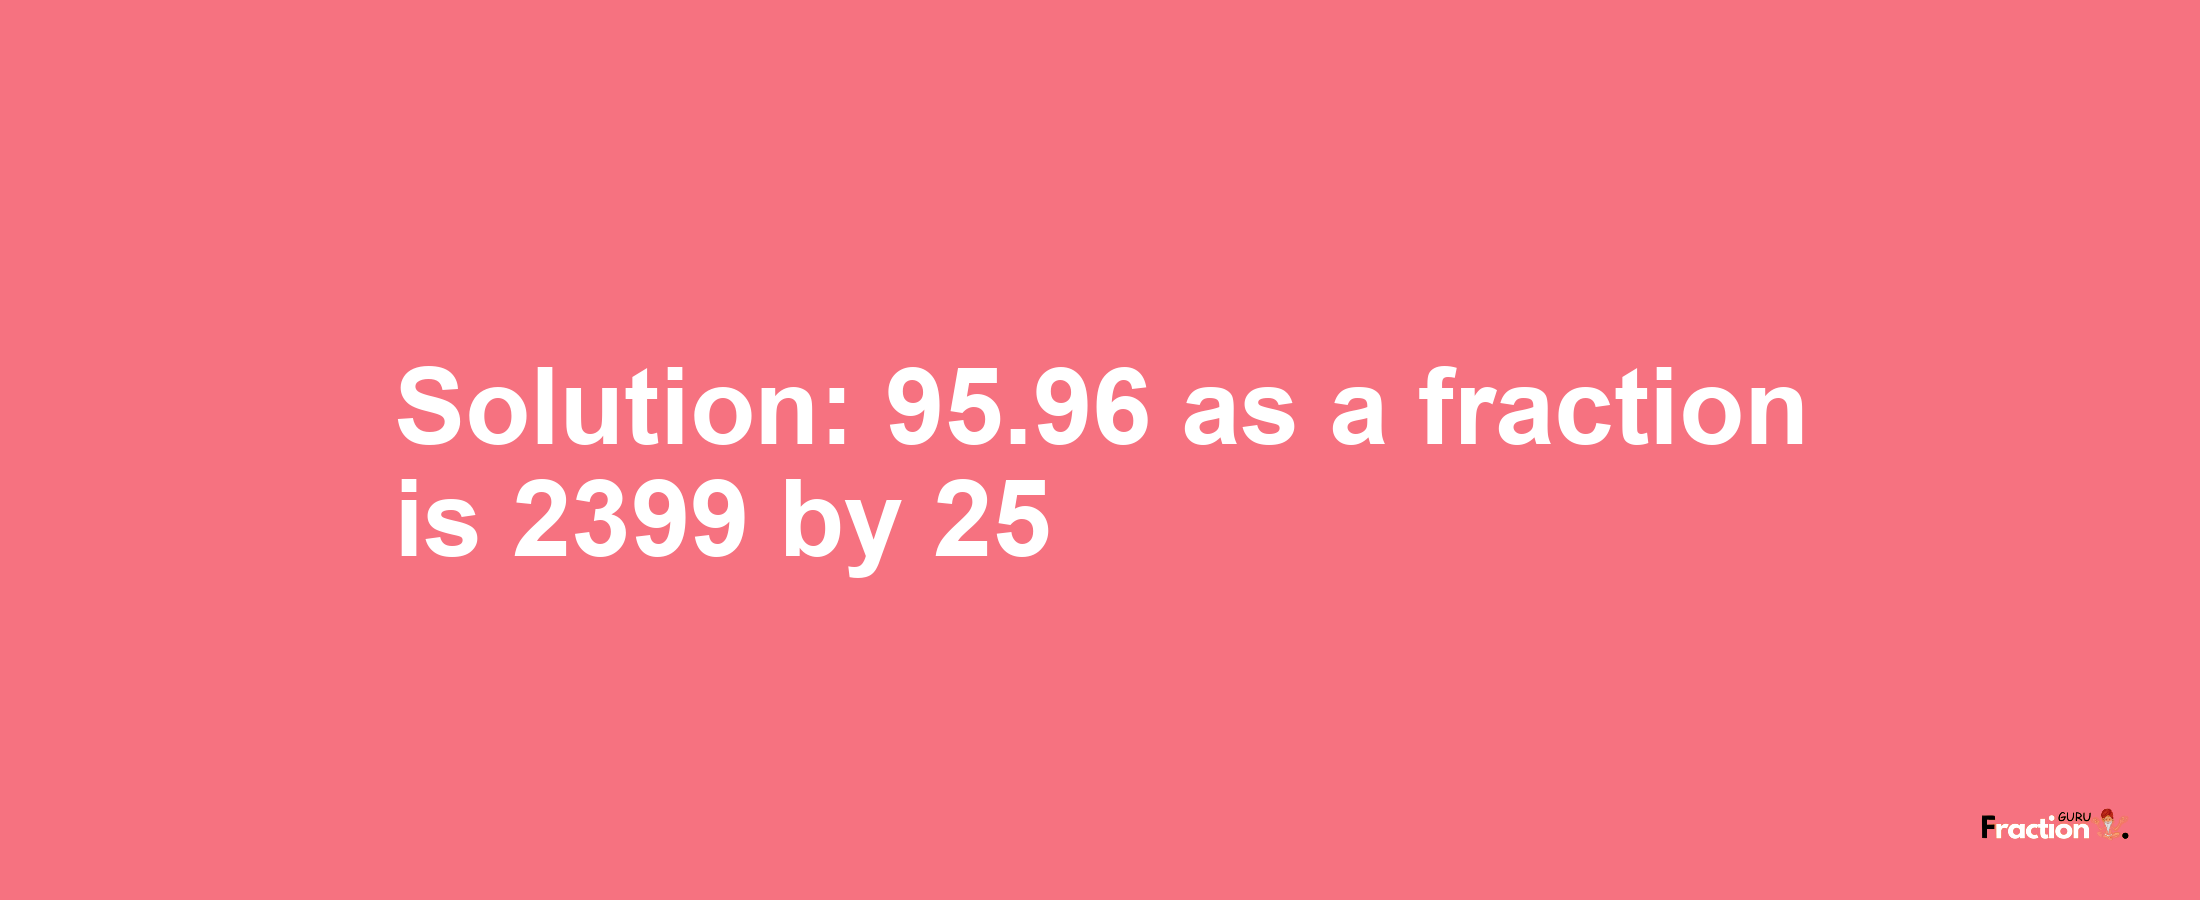 Solution:95.96 as a fraction is 2399/25